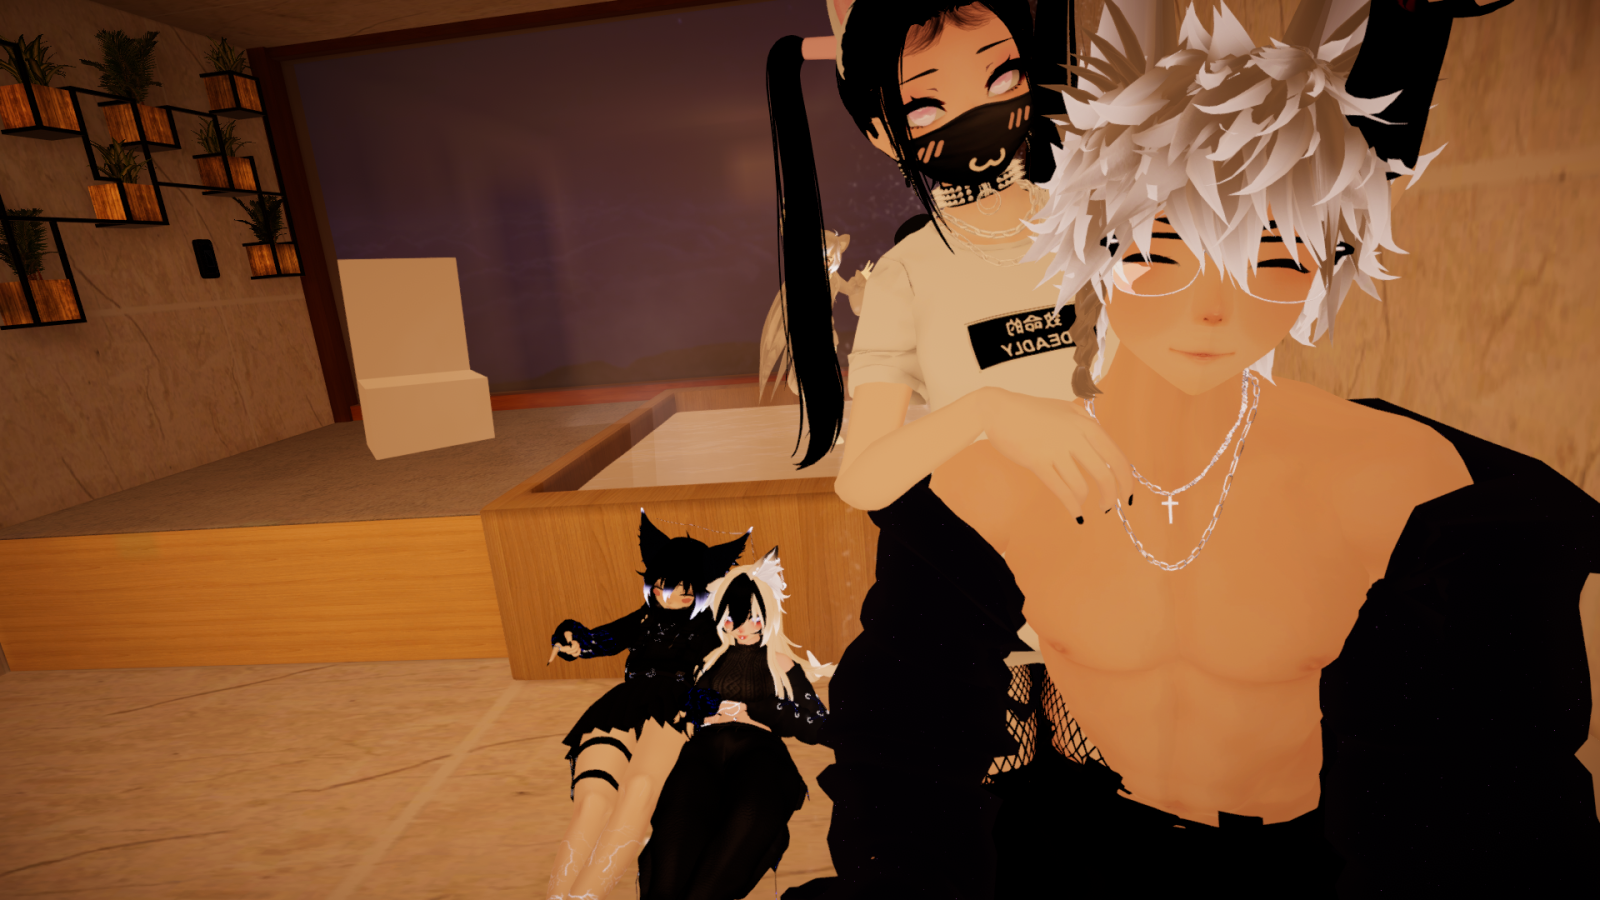 VRChat_1920x1080_2021-04-22_23-59-31.989.png